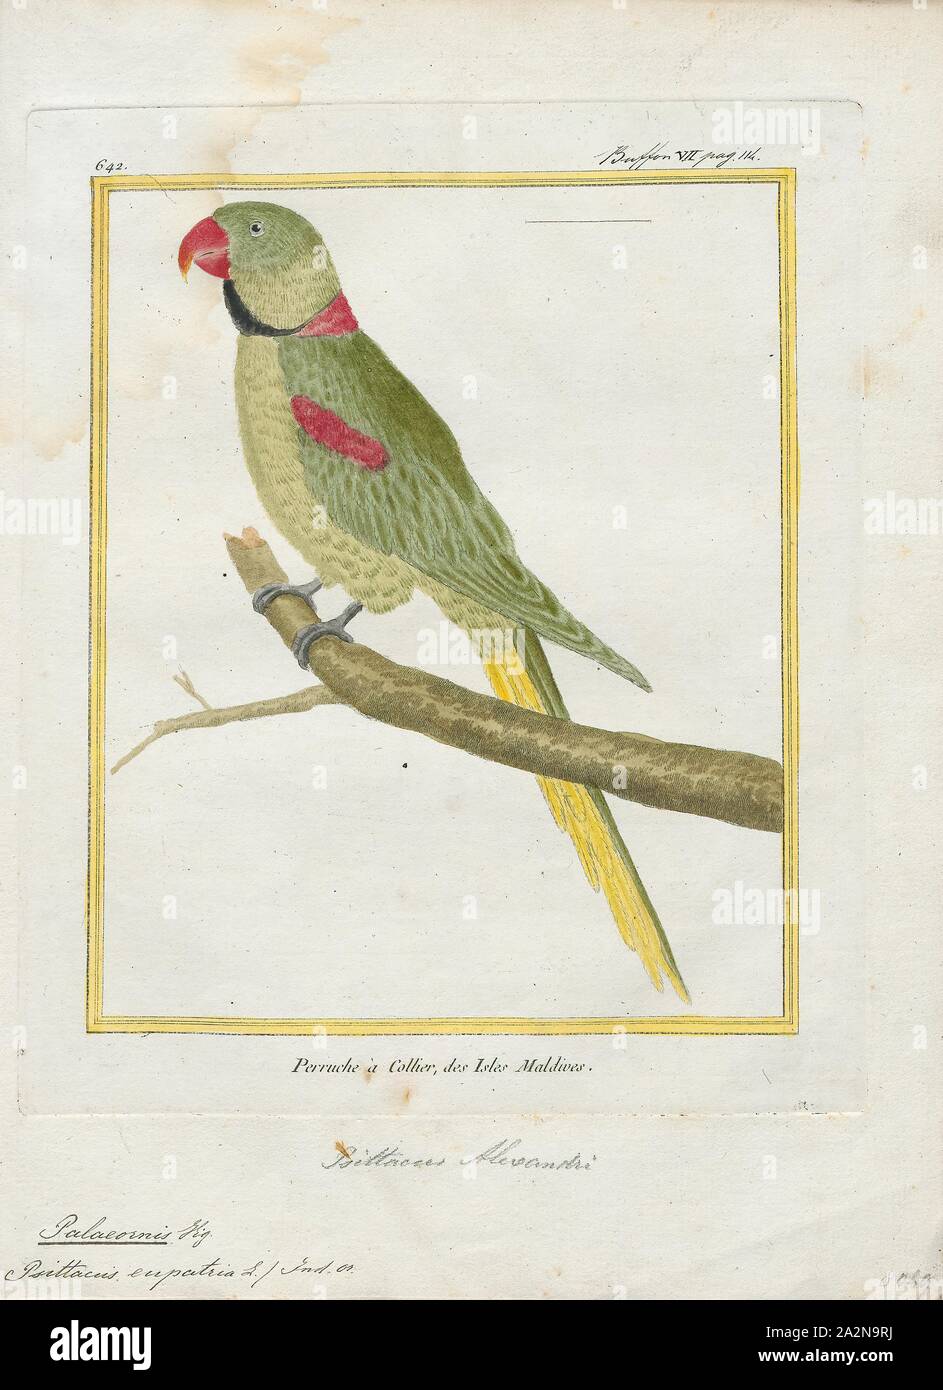 Palaeornis eupatria, Print, Psittacula, Members of the parrot genus Psittacula or Afro-Asian ring-necked parakeets as they are commonly known in aviculture originates found from Africa to South-East Asia. It is a widespread group, with a clear concentration of species in south Asia, but also with representatives in Africa and the islands of the Indian Ocean. This is the only genus of Parrot which has the majority of its species in continental Asia. Of all the extant species only Psittacula calthropae, Psittacula caniceps and Psittacula echo do not have a representative subspecies in any part Stock Photo